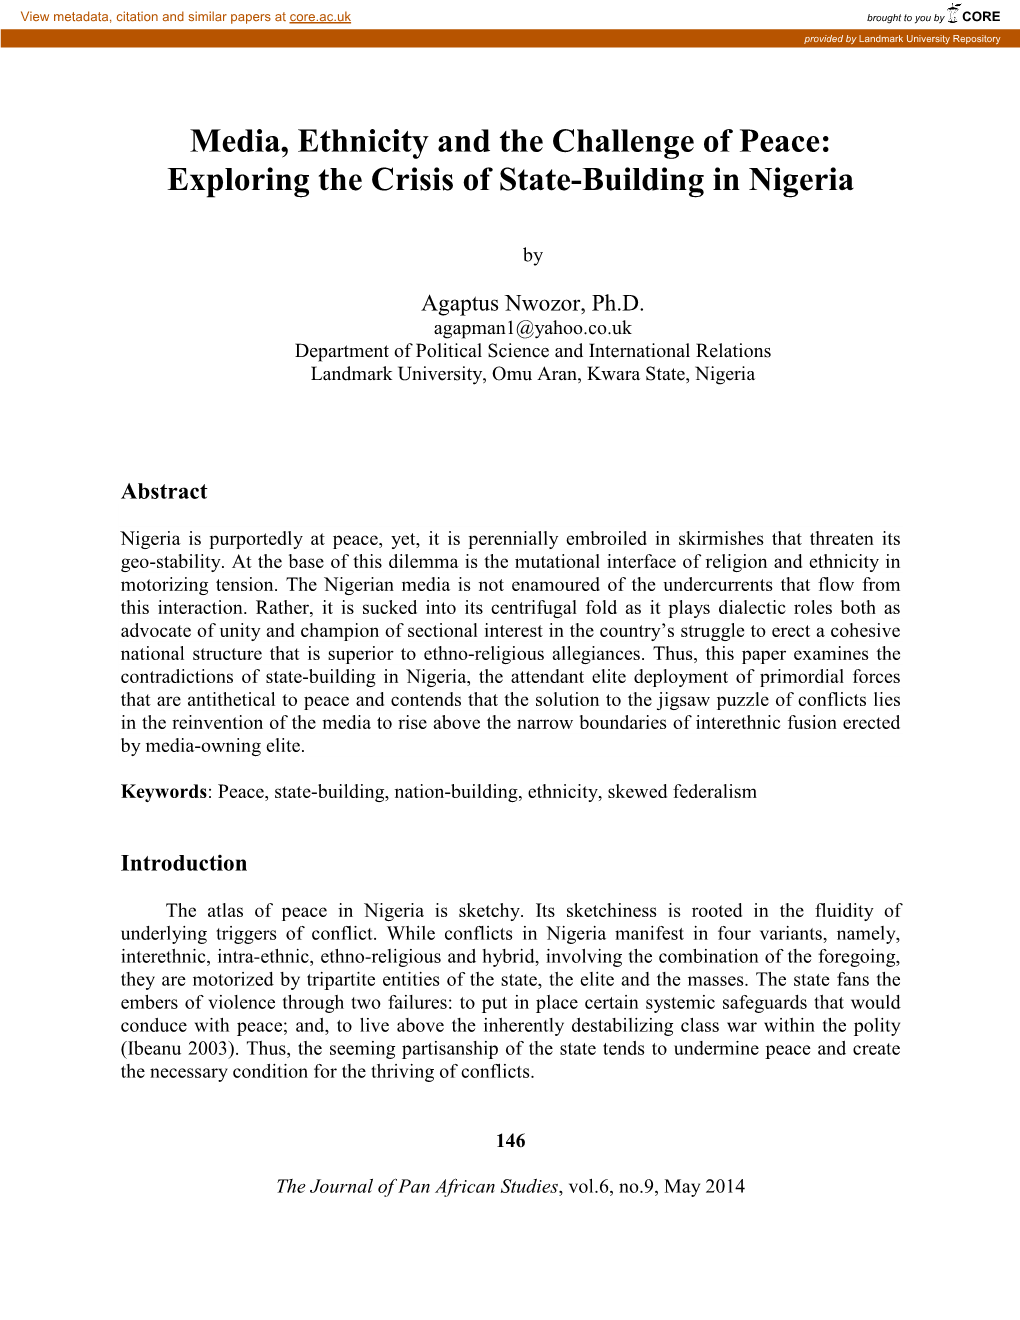 Media, Ethnicity and the Challenge of Peace: Exploring the Crisis of State-Building in Nigeria